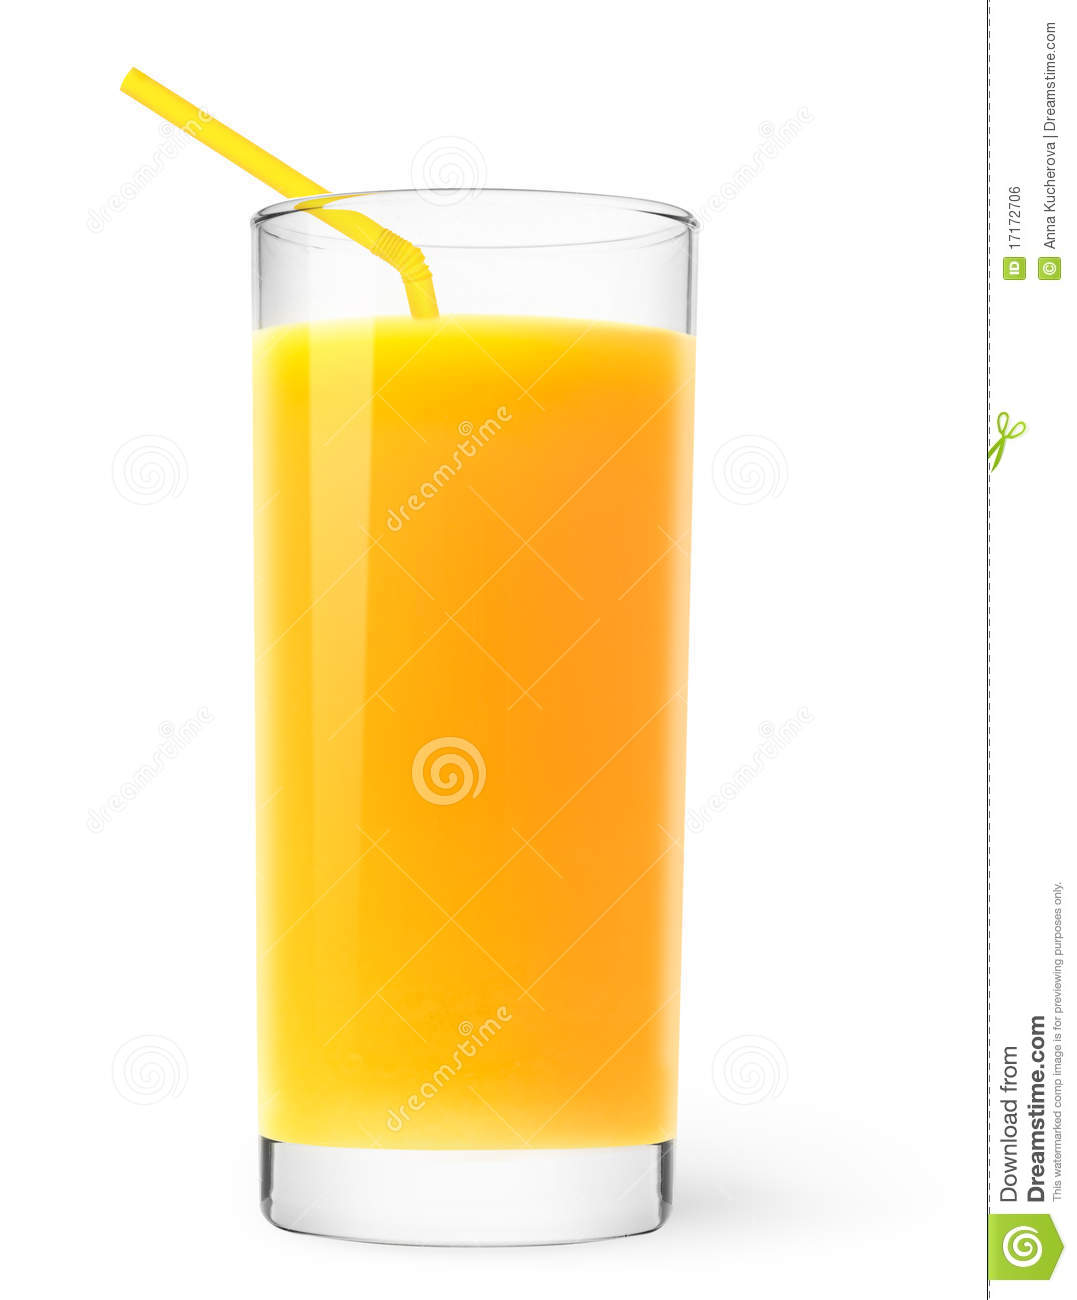 glass of juice clipart - photo #19